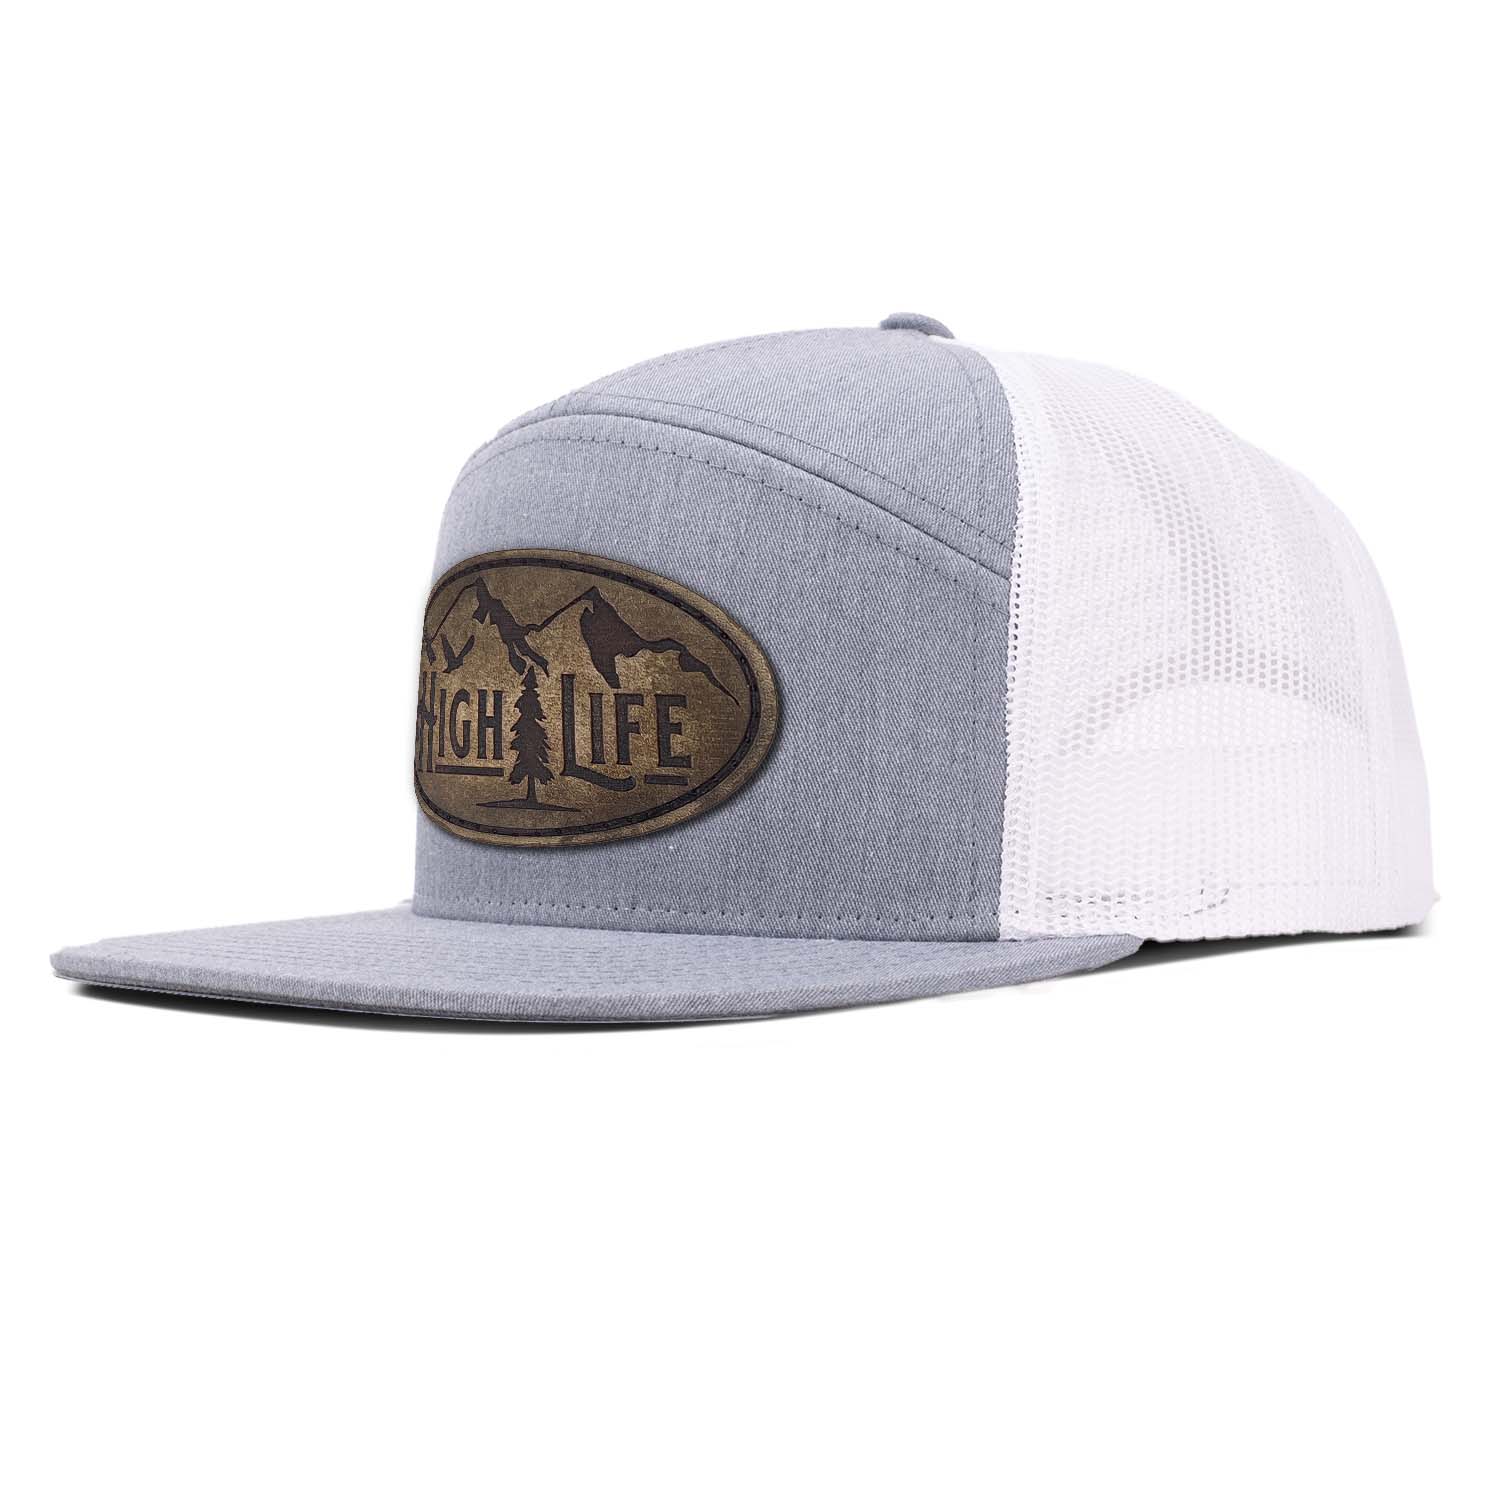 Revolution Mfg heather gray 7 panel trucker hat with white mesh featuring our full grain leather vintage finish High Life patch stitched on the seamless front panel